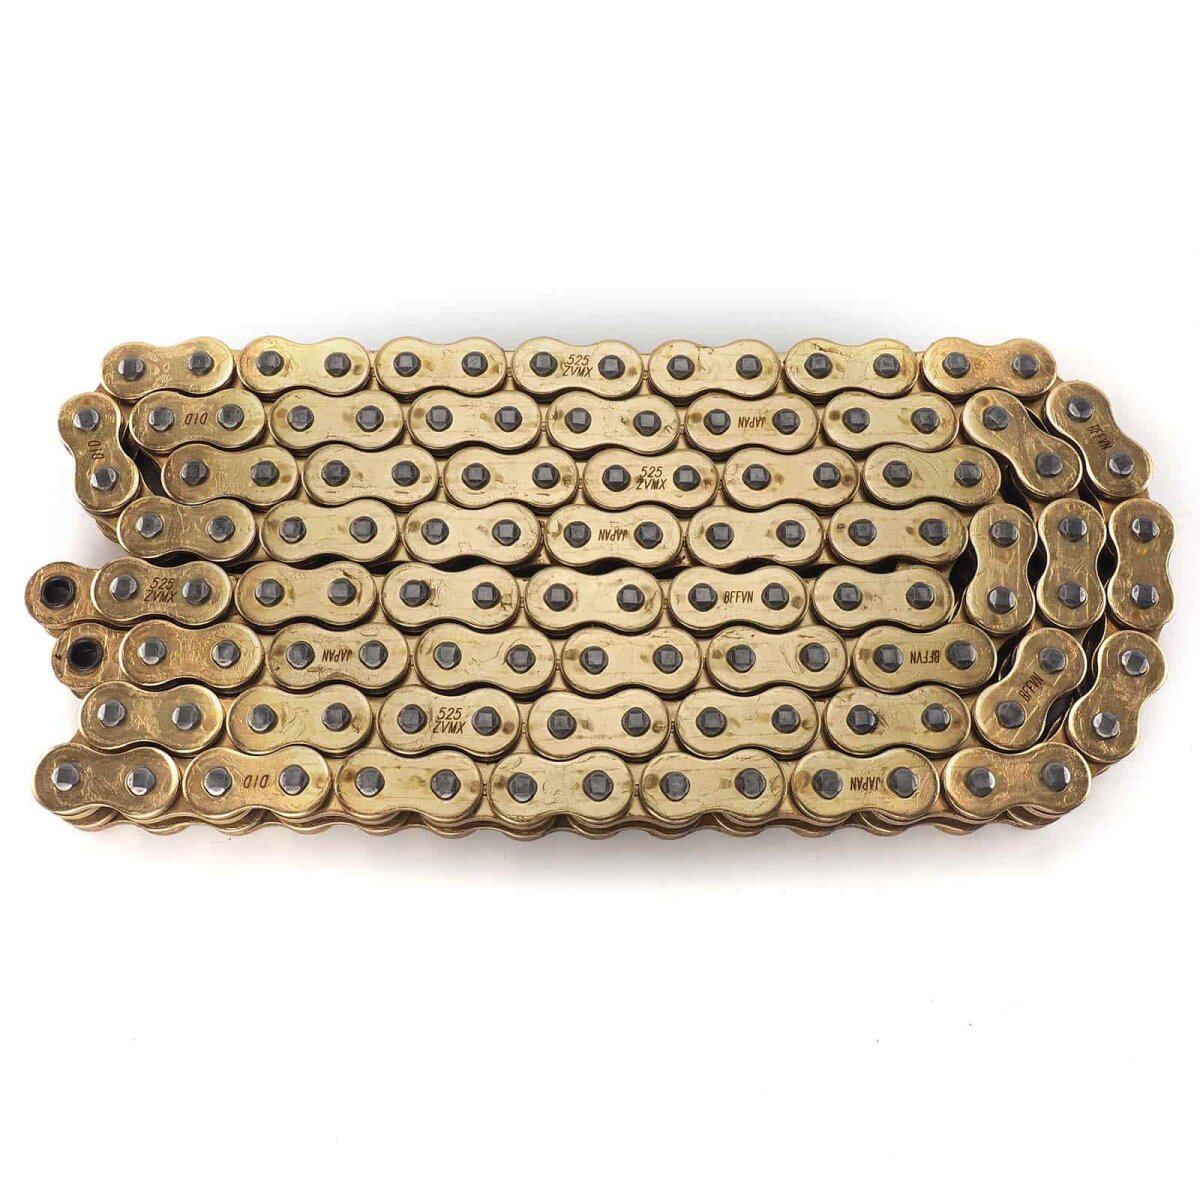 D.I.D X-ring chain G&G 525ZVMX2/114 with rivet lock, 156,88 € for 